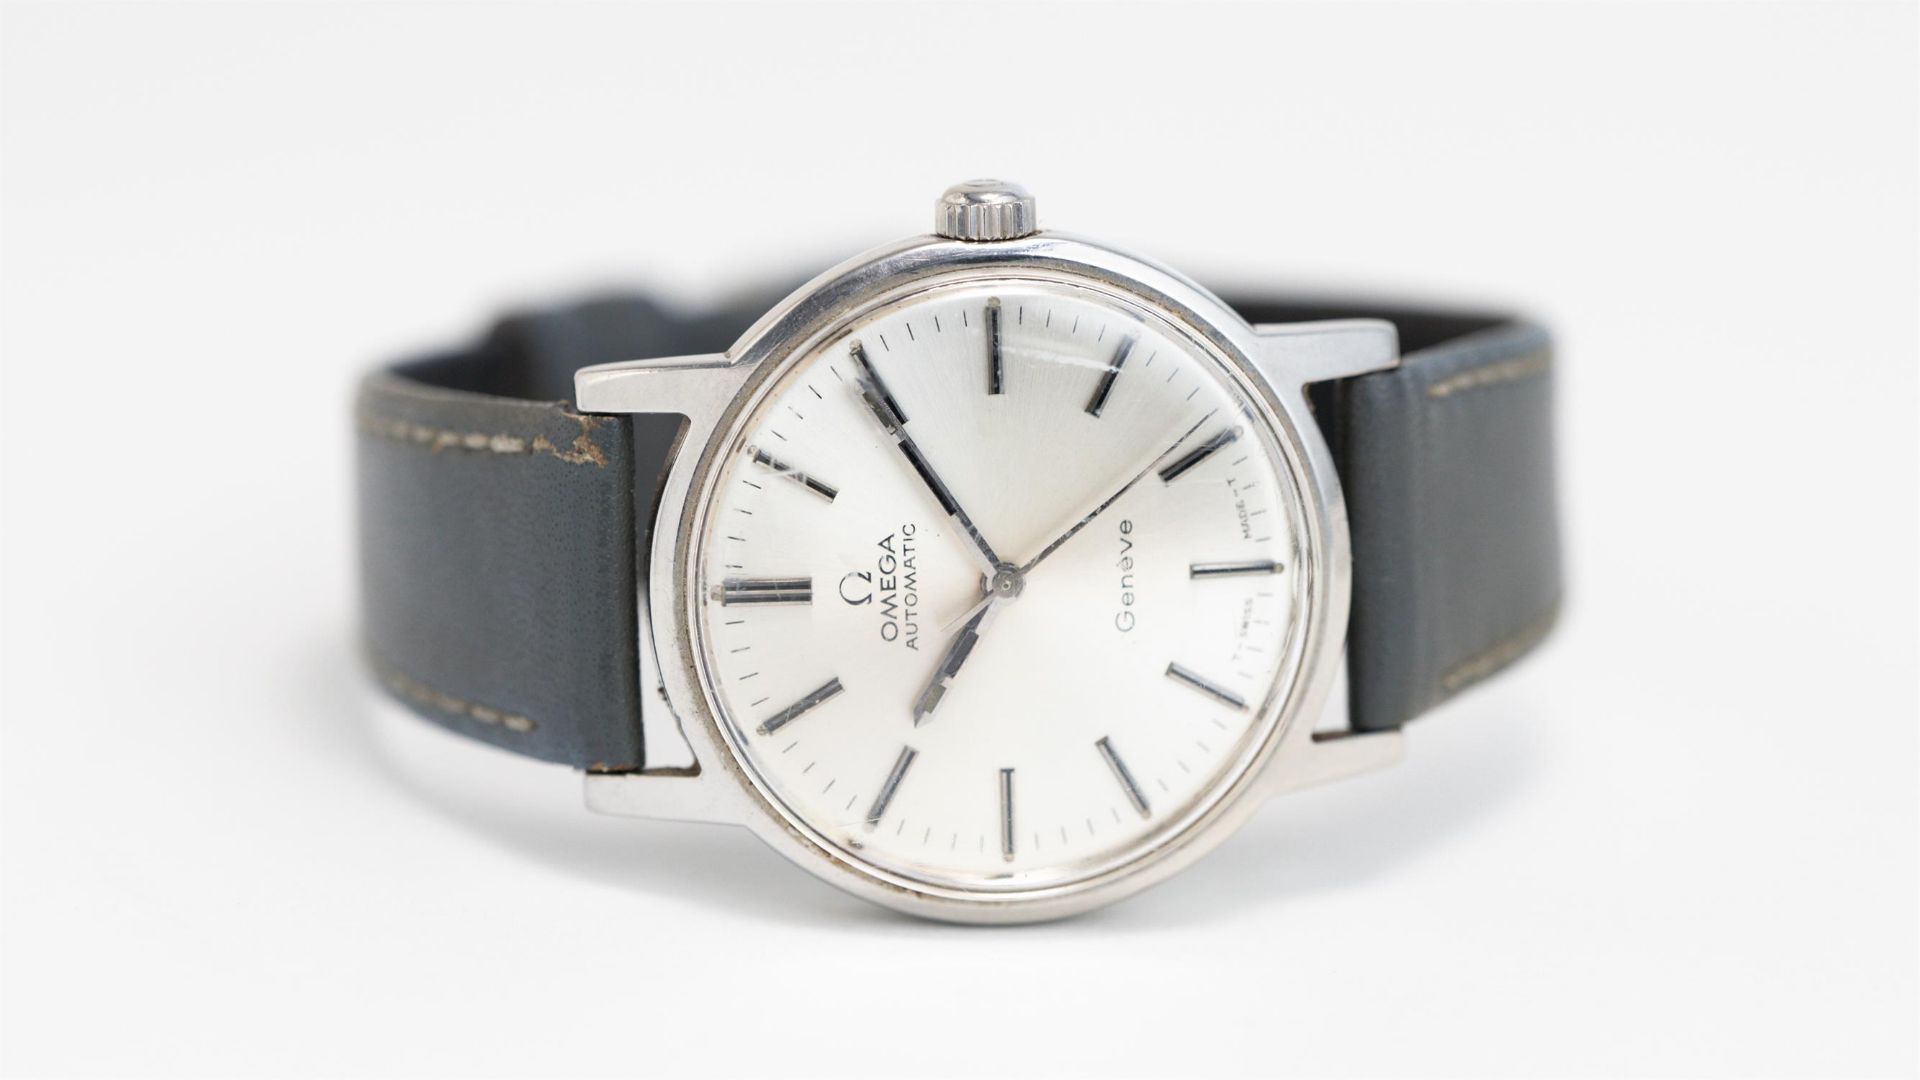 C.1969 Omega Geneve Automatic strap watch - Image 3 of 3